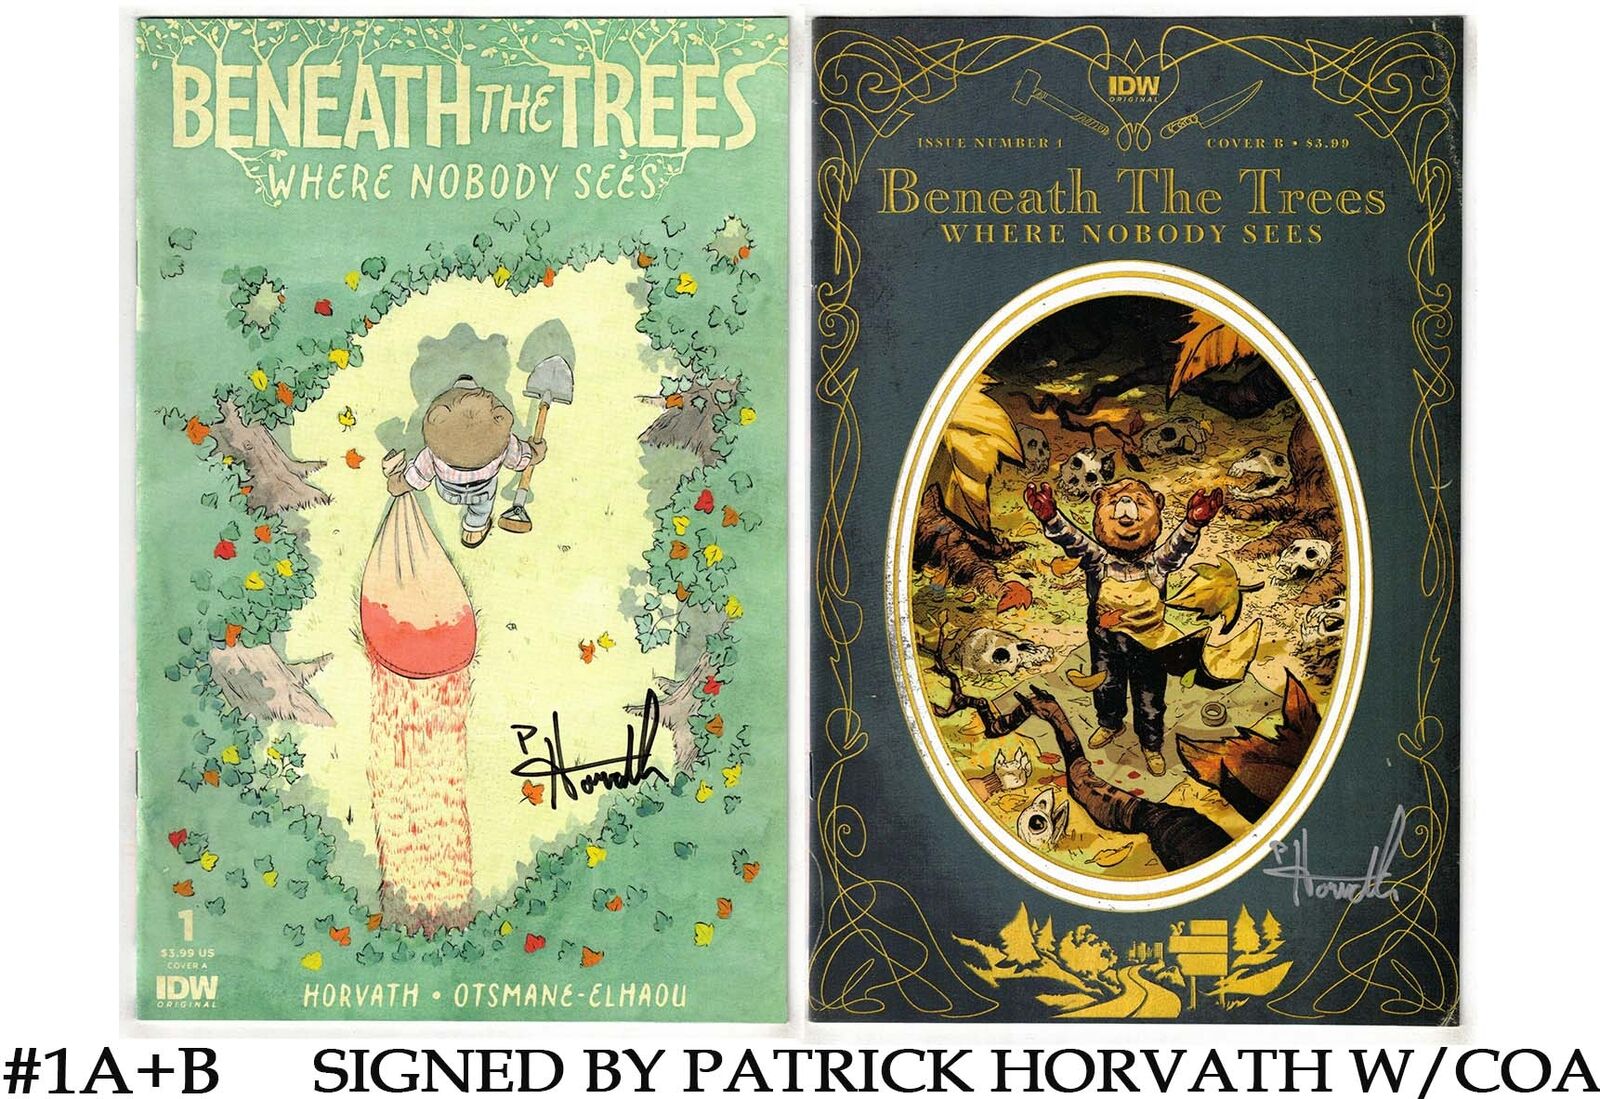 BENEATH THE TREES WHERE NOBODY SEES #1-CVR A+B 1ST PT-HORVATH SIGNED+COA- VF+/NM